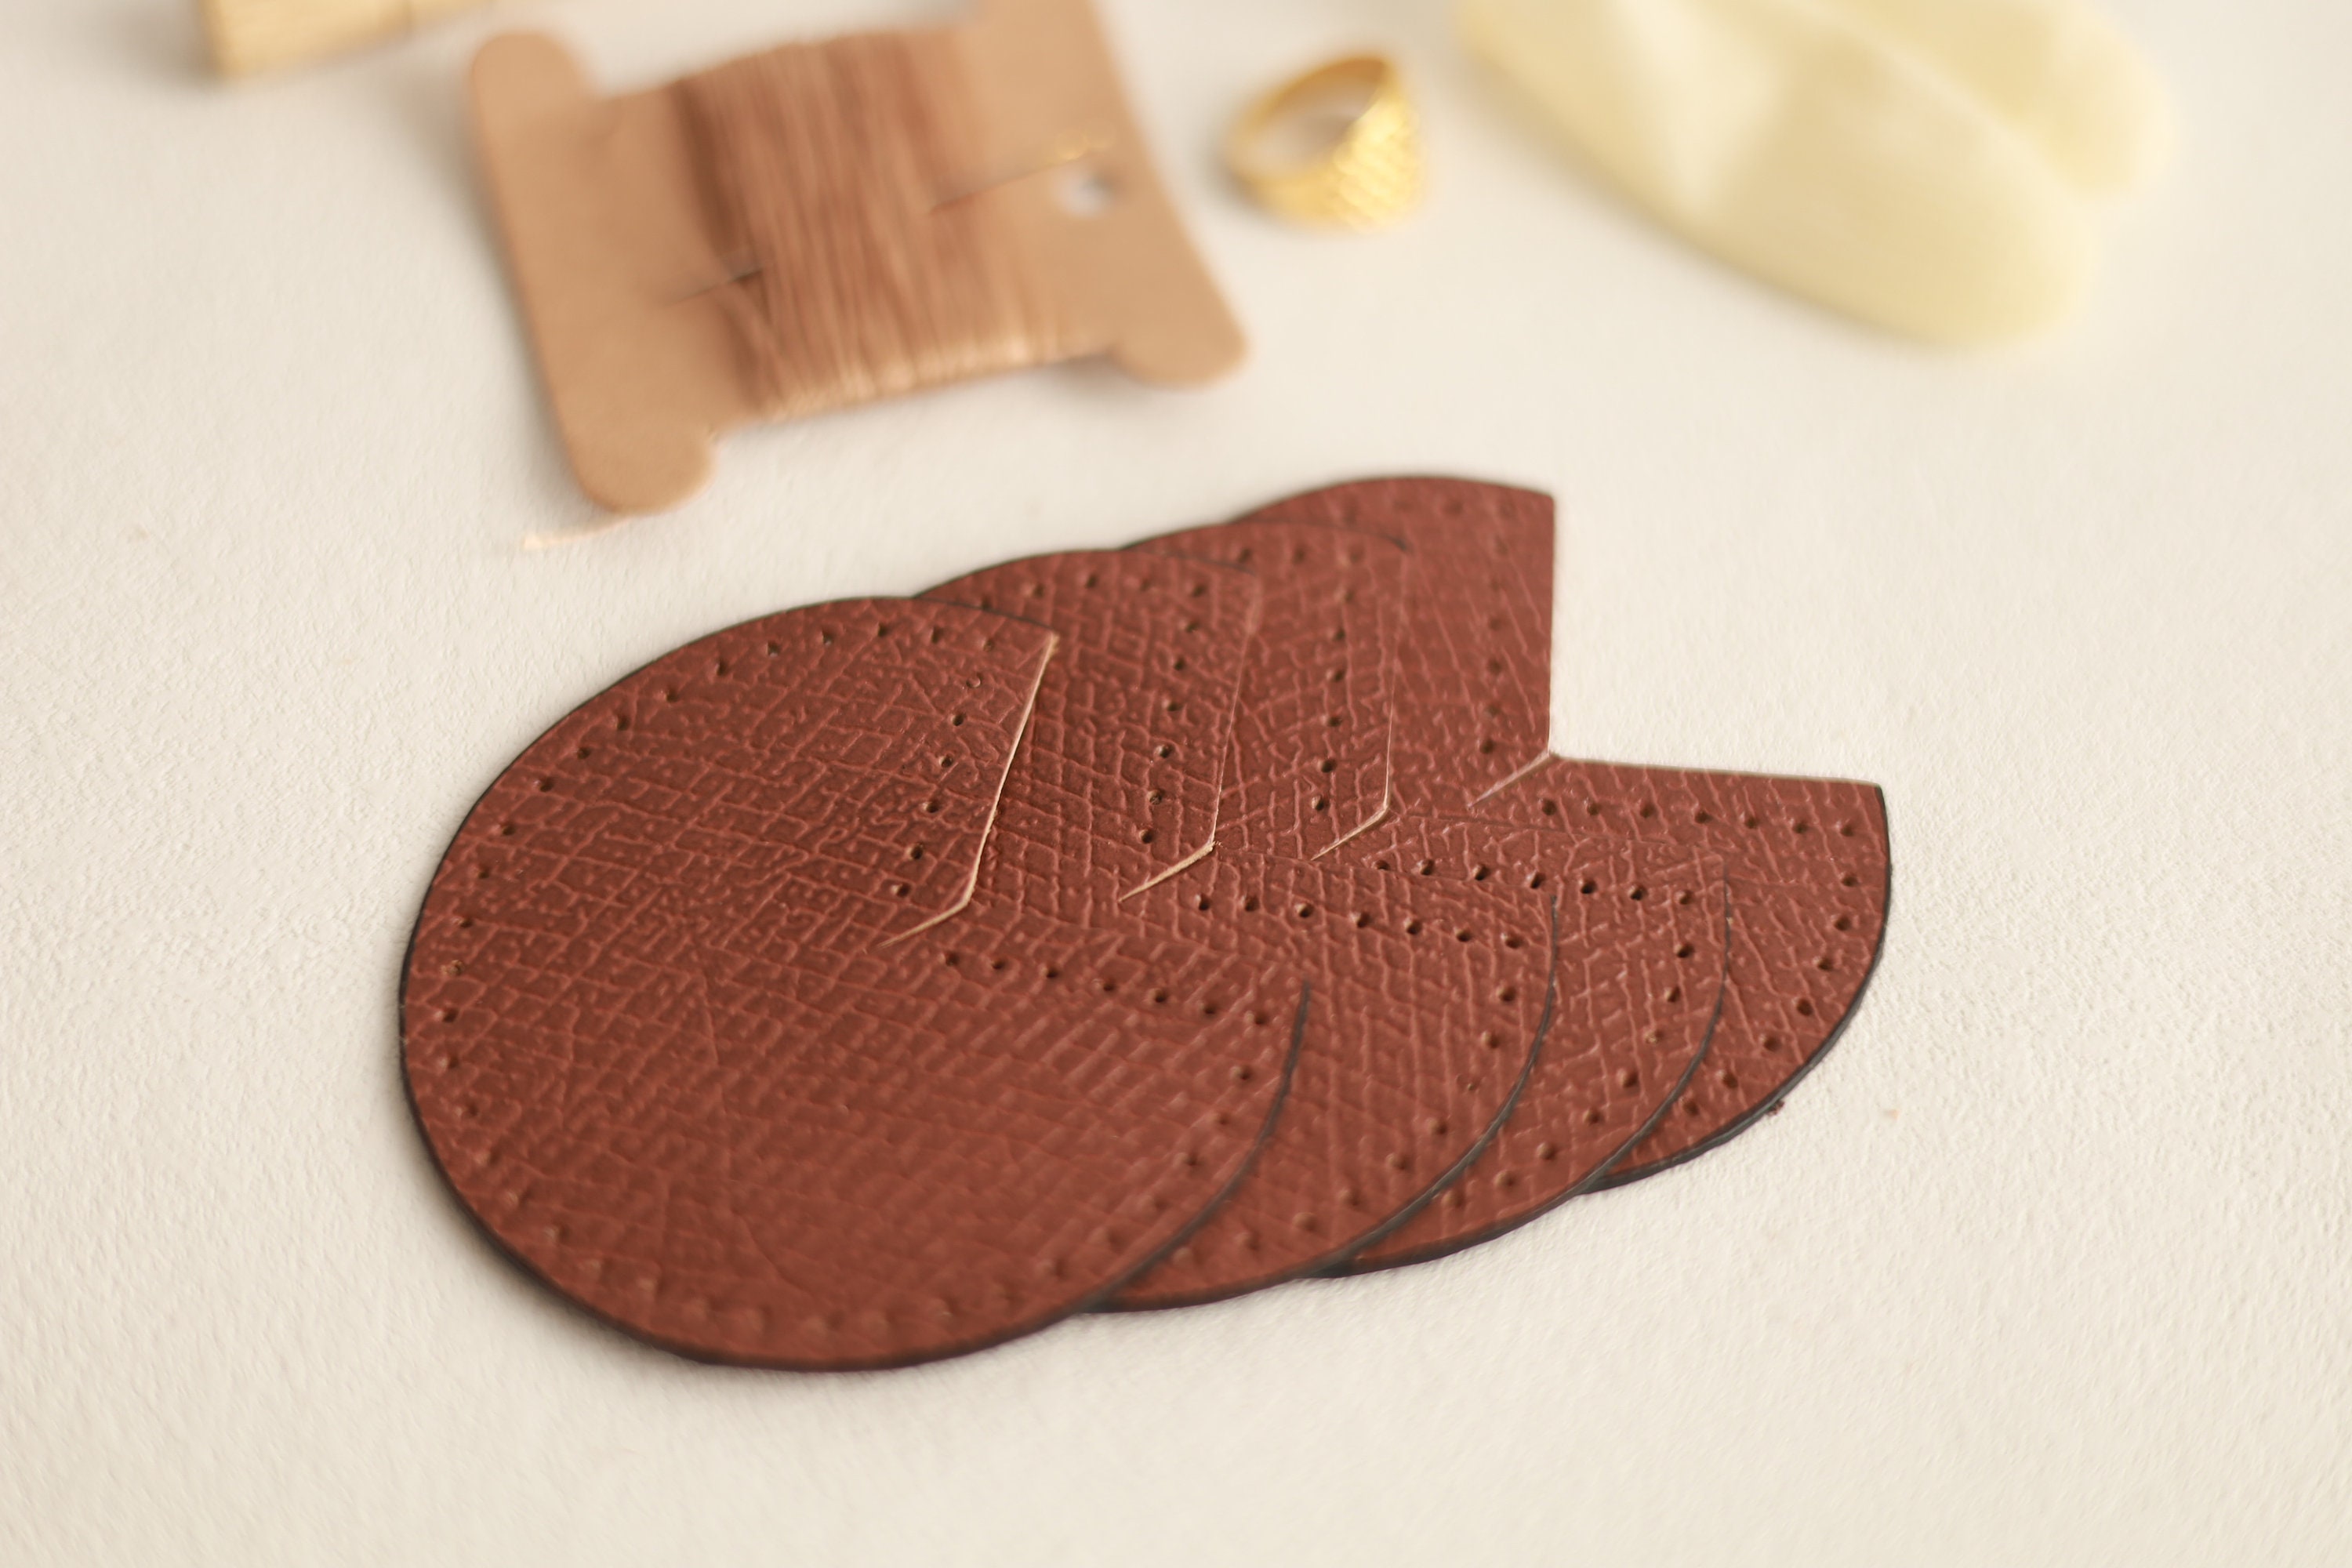 DIY Kit for Bag Corner Fix Protector Real Leather Patches 